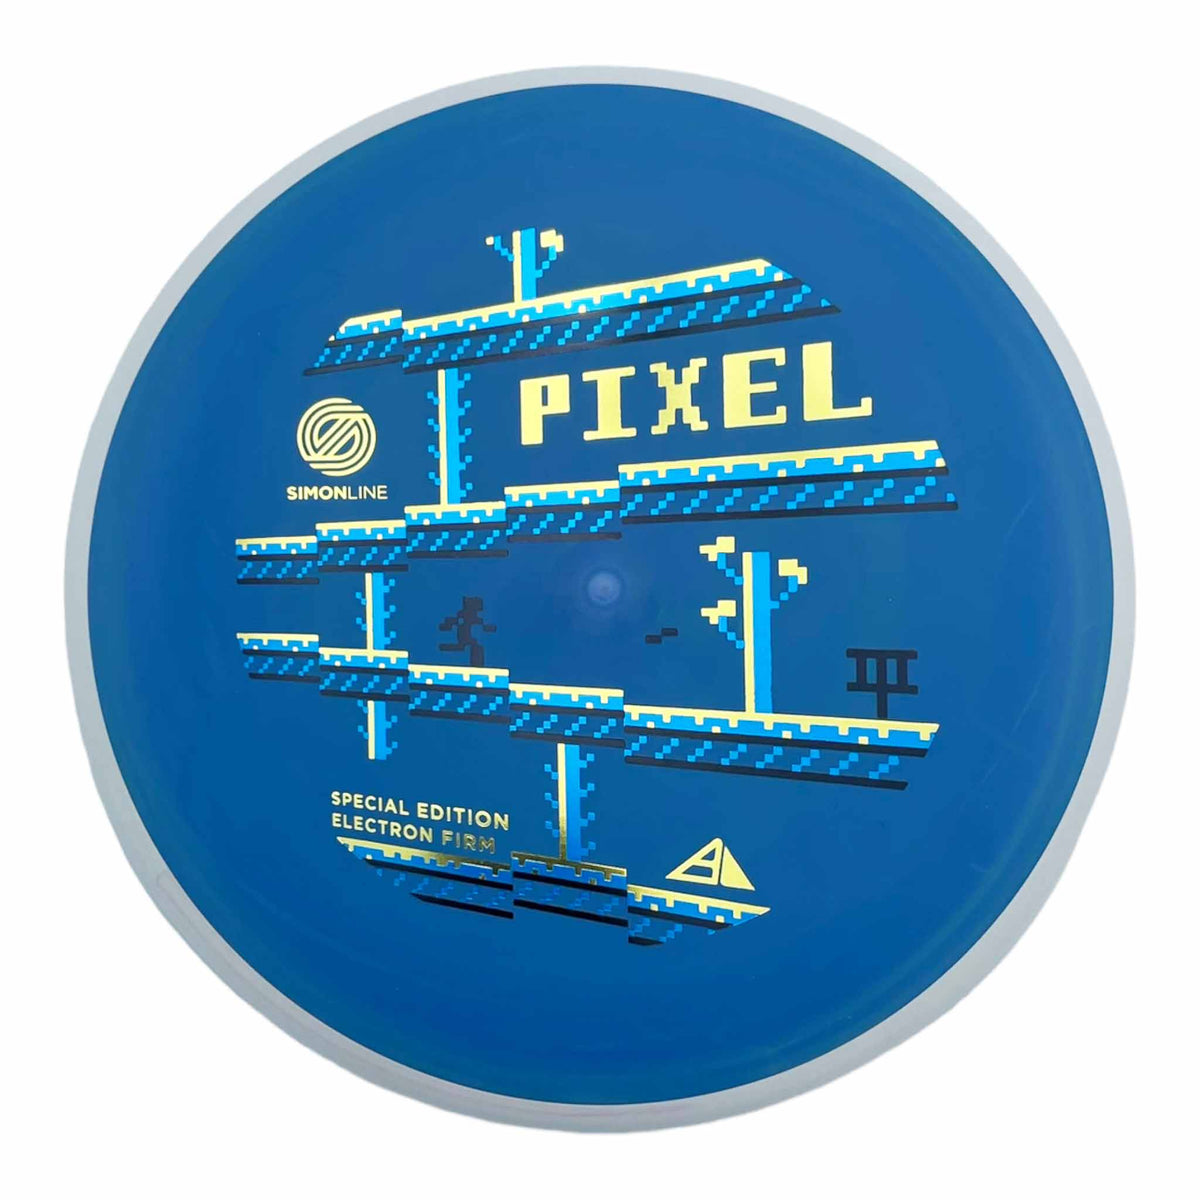 Axiom Discs Simon Line Electron Firm Pixel Special Edition putter and approach - Blue / Gold